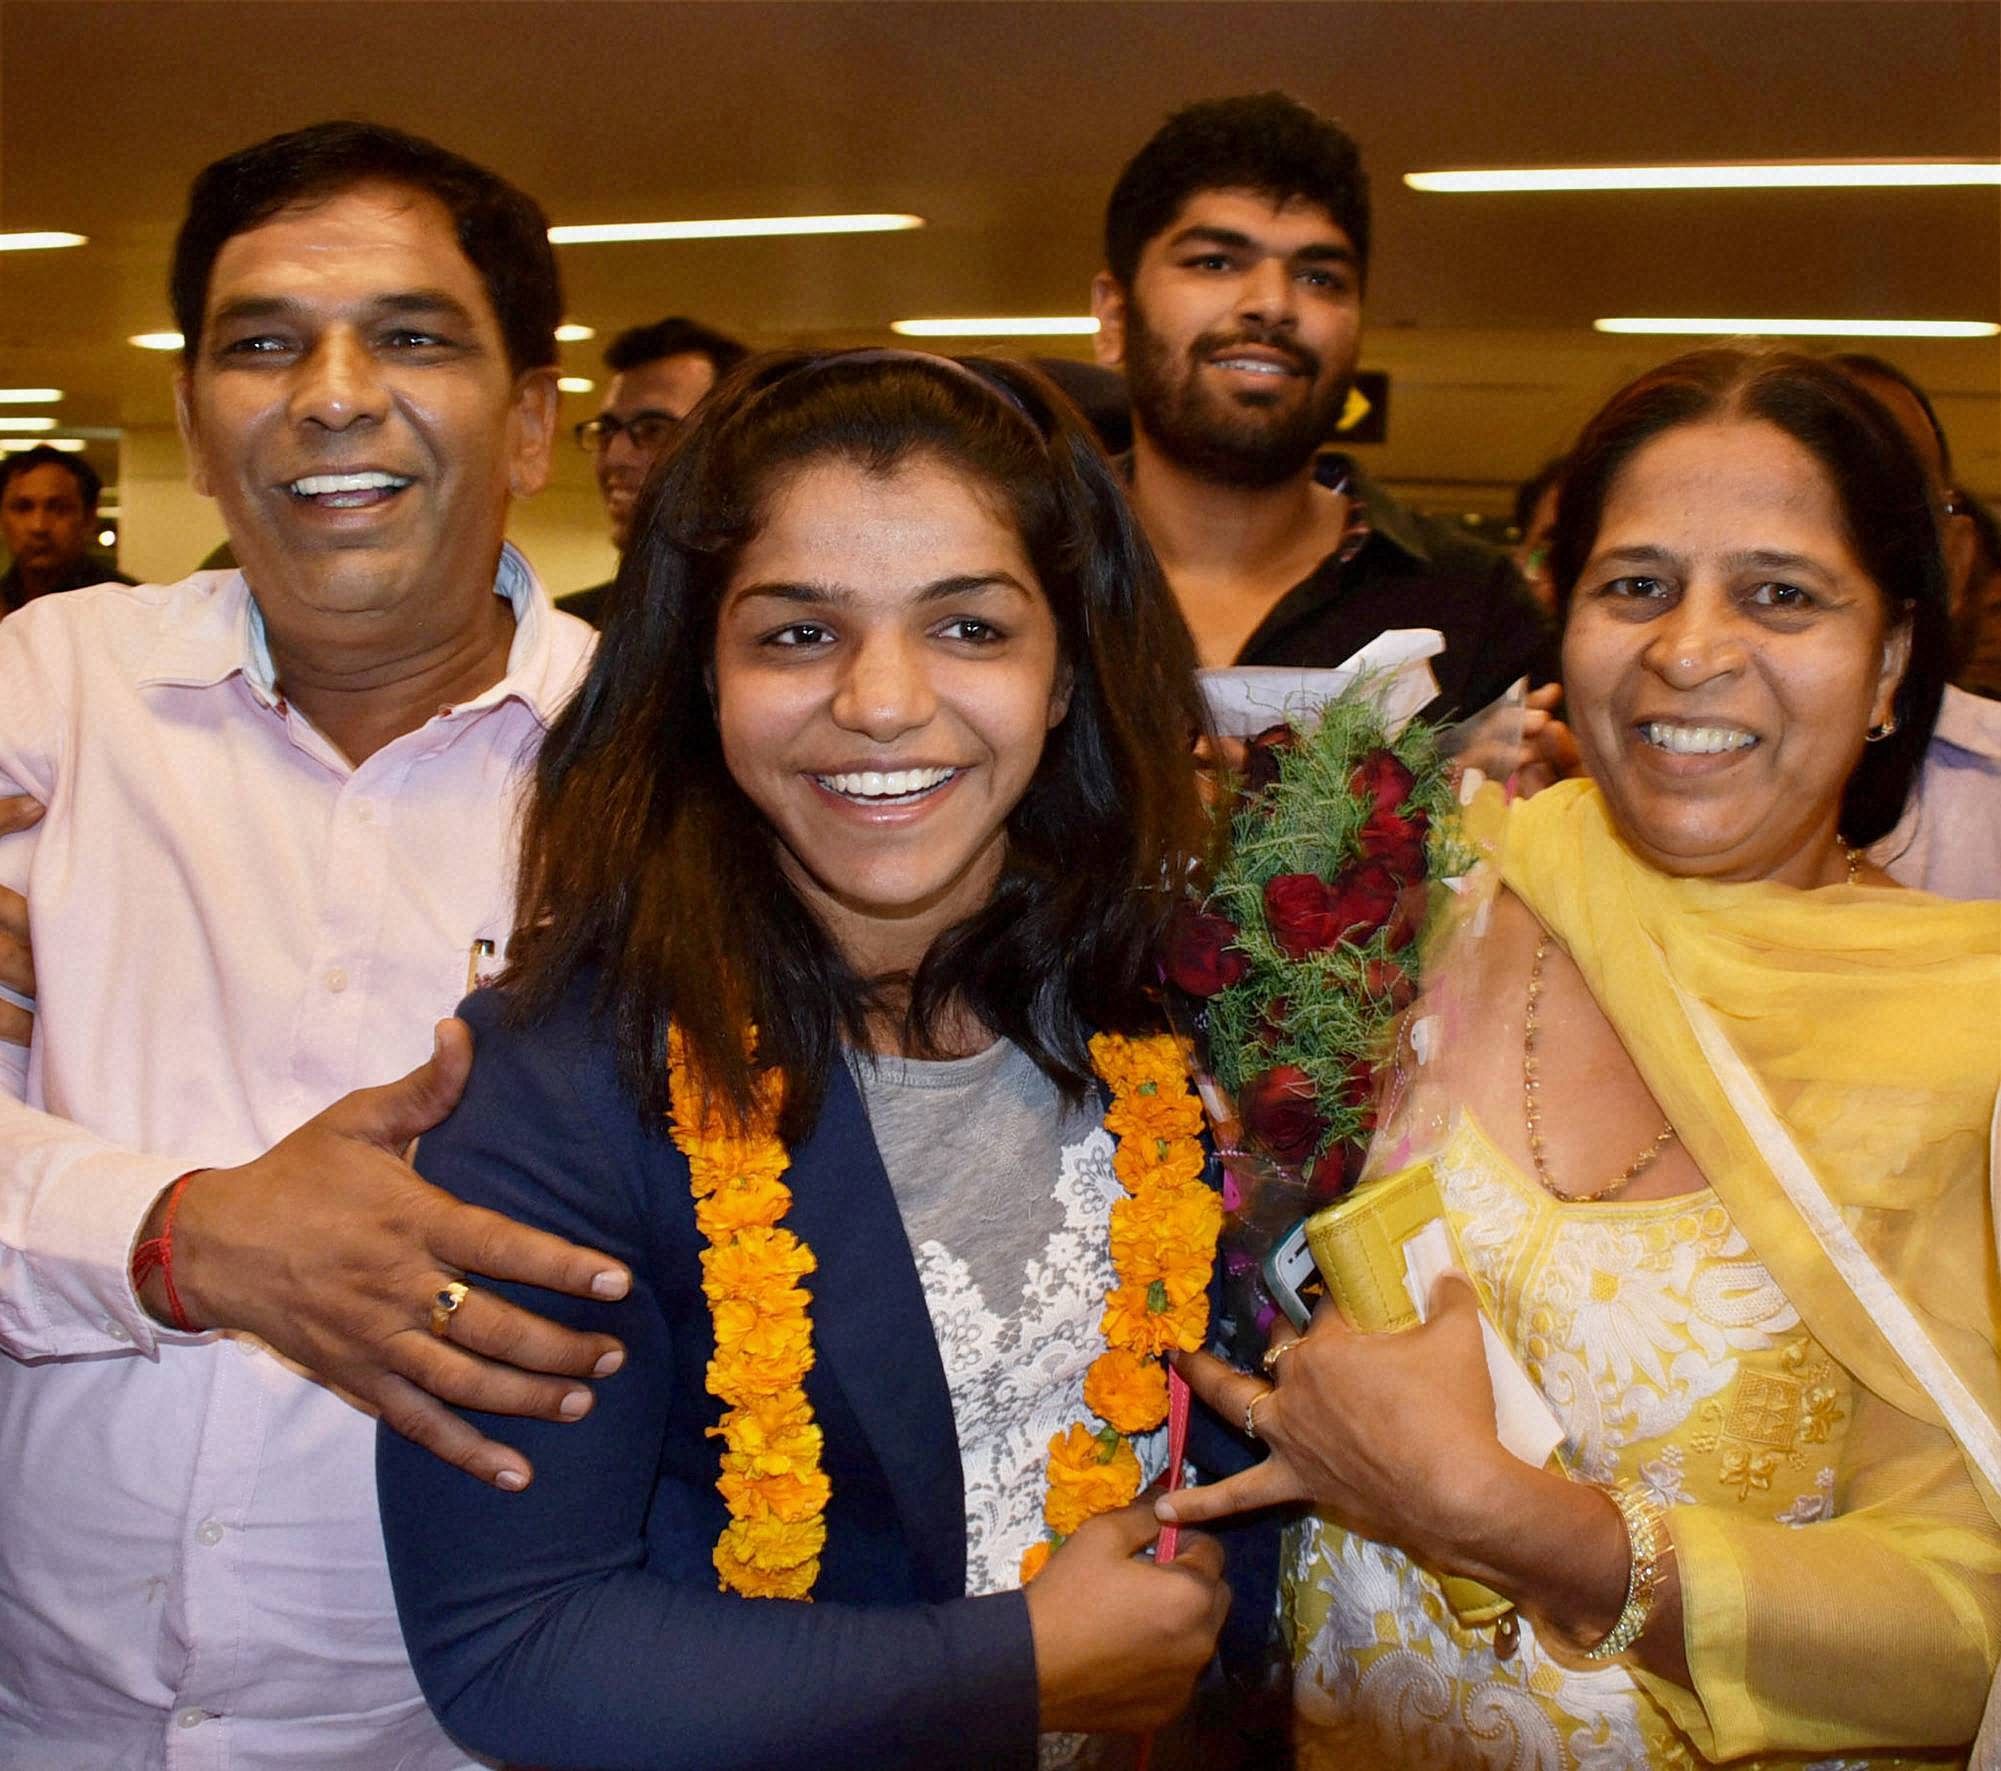 Sakshi's father Sukhbir Malik became emotional when he met his daughter and saw her medal. PTI